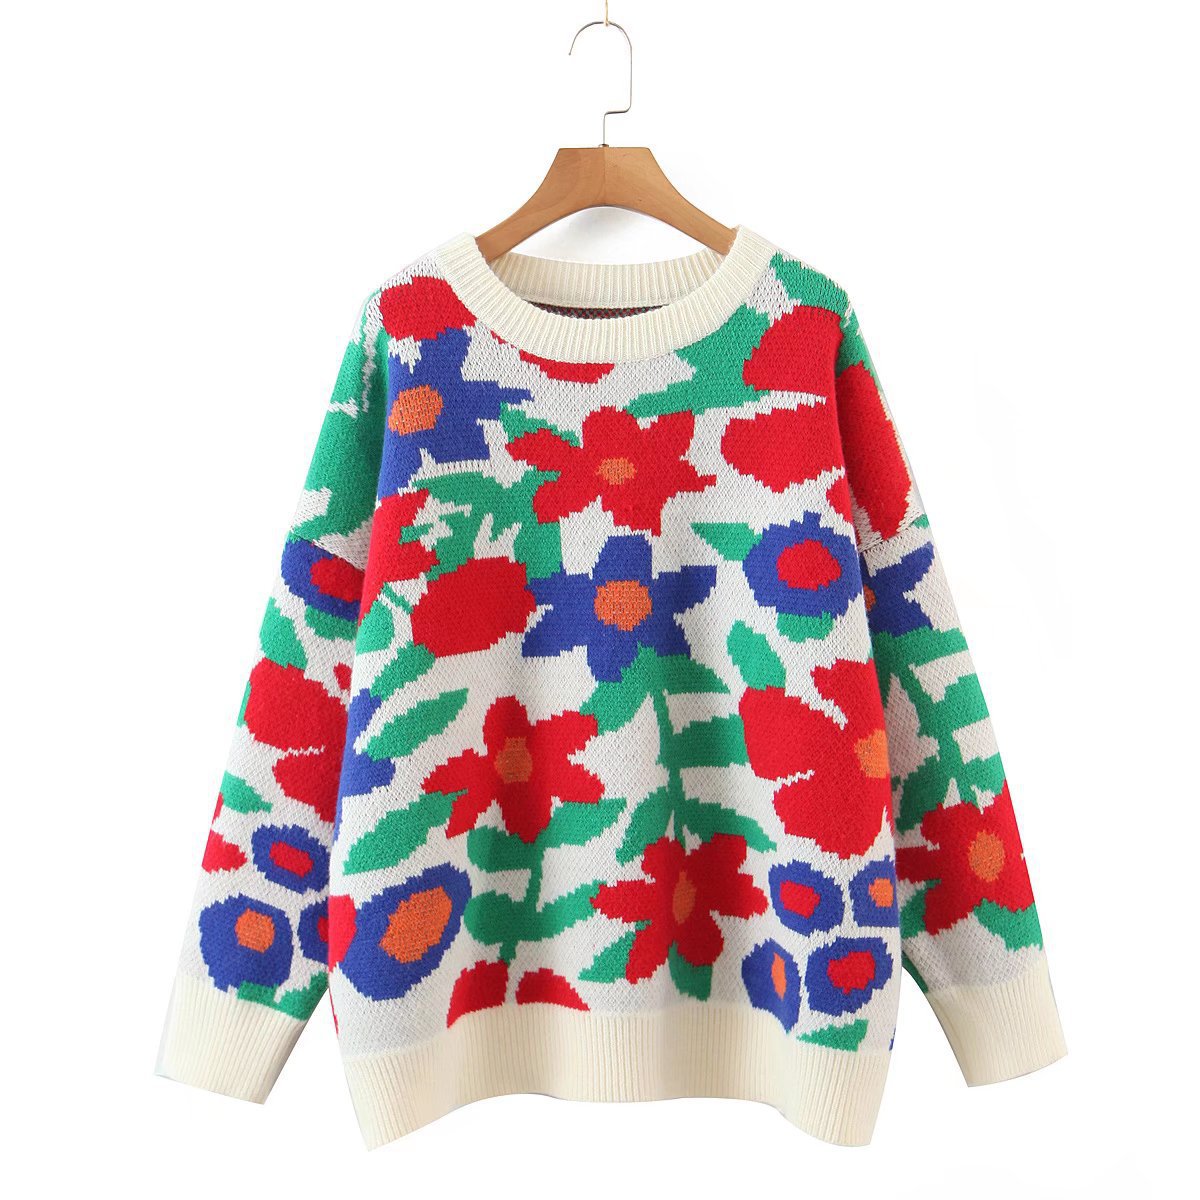 Autumn Winter Large Floral Embroidery round Neck Loose Long Sleeves Knitted Sweater Pullover Women